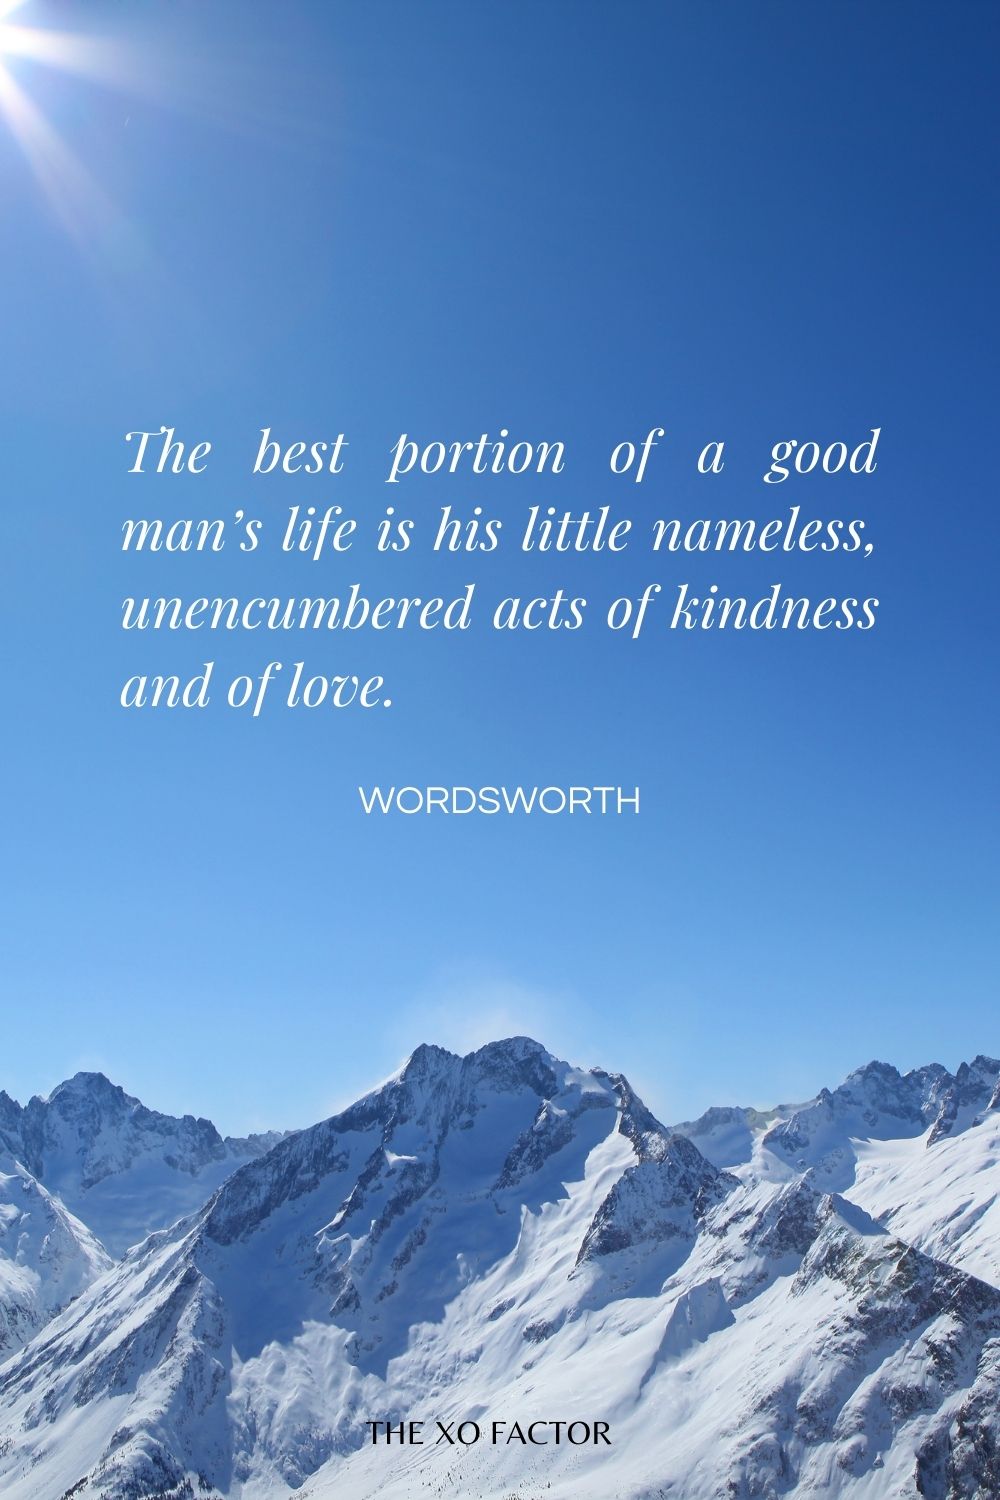 The best portion of a good man’s life is his little nameless, unencumbered acts of kindness and of love.” Wordsworth